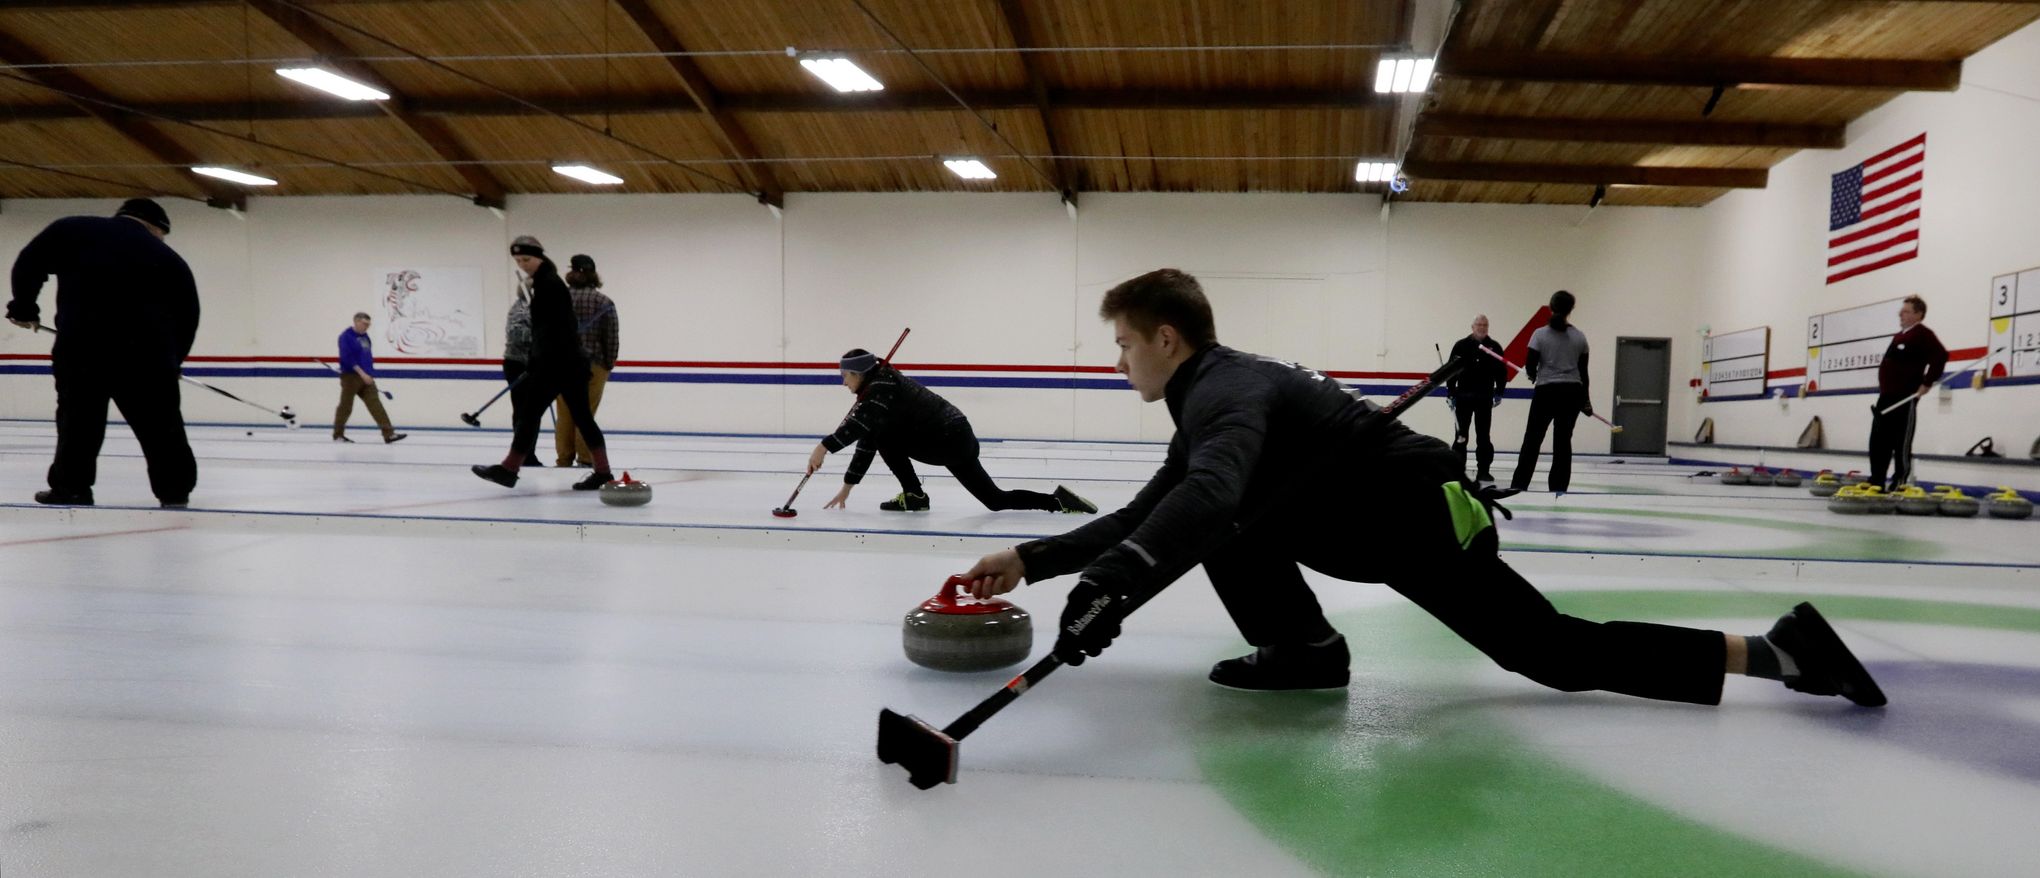 Made for Hollywood: The tale of Team USA's first Olympic gold medal in  curling - The Boston Globe